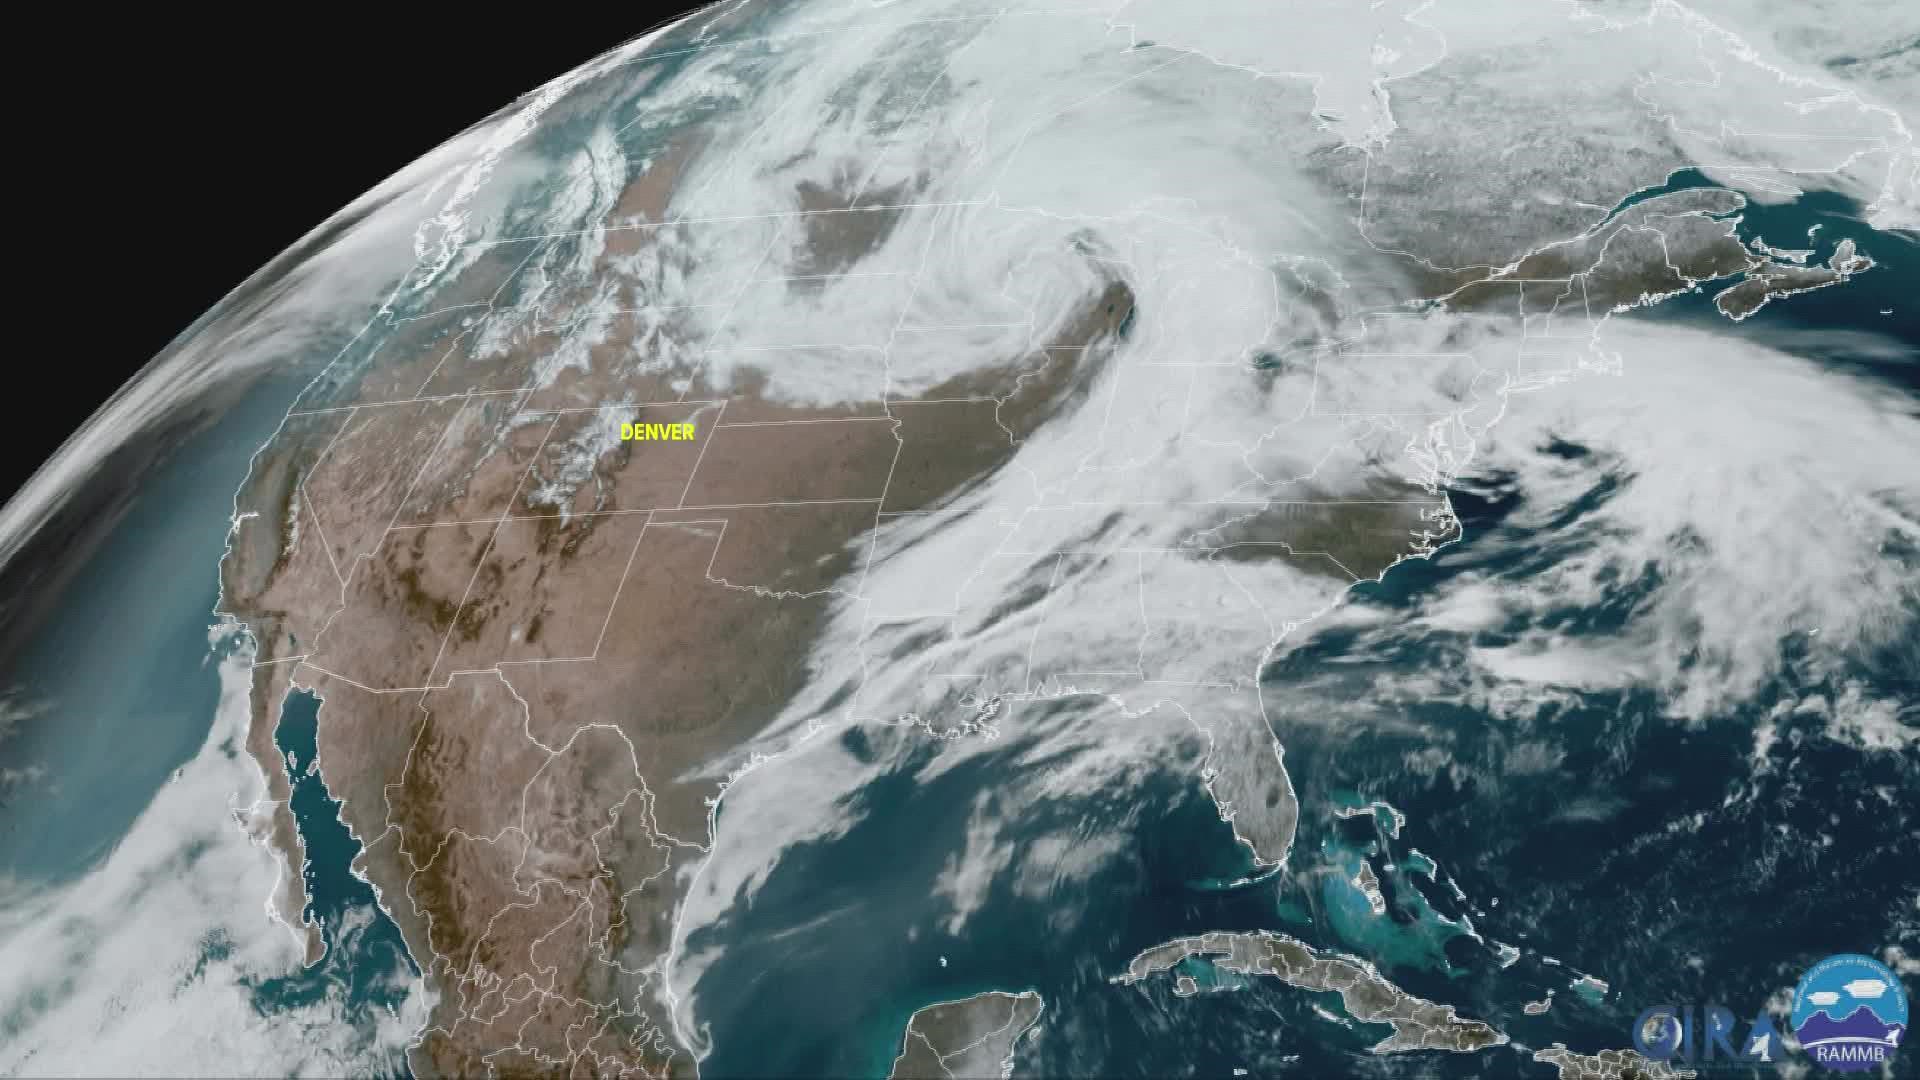 The storm system way up in the upper Midwest that's causing this wind event is called a mid-latitude cyclone.